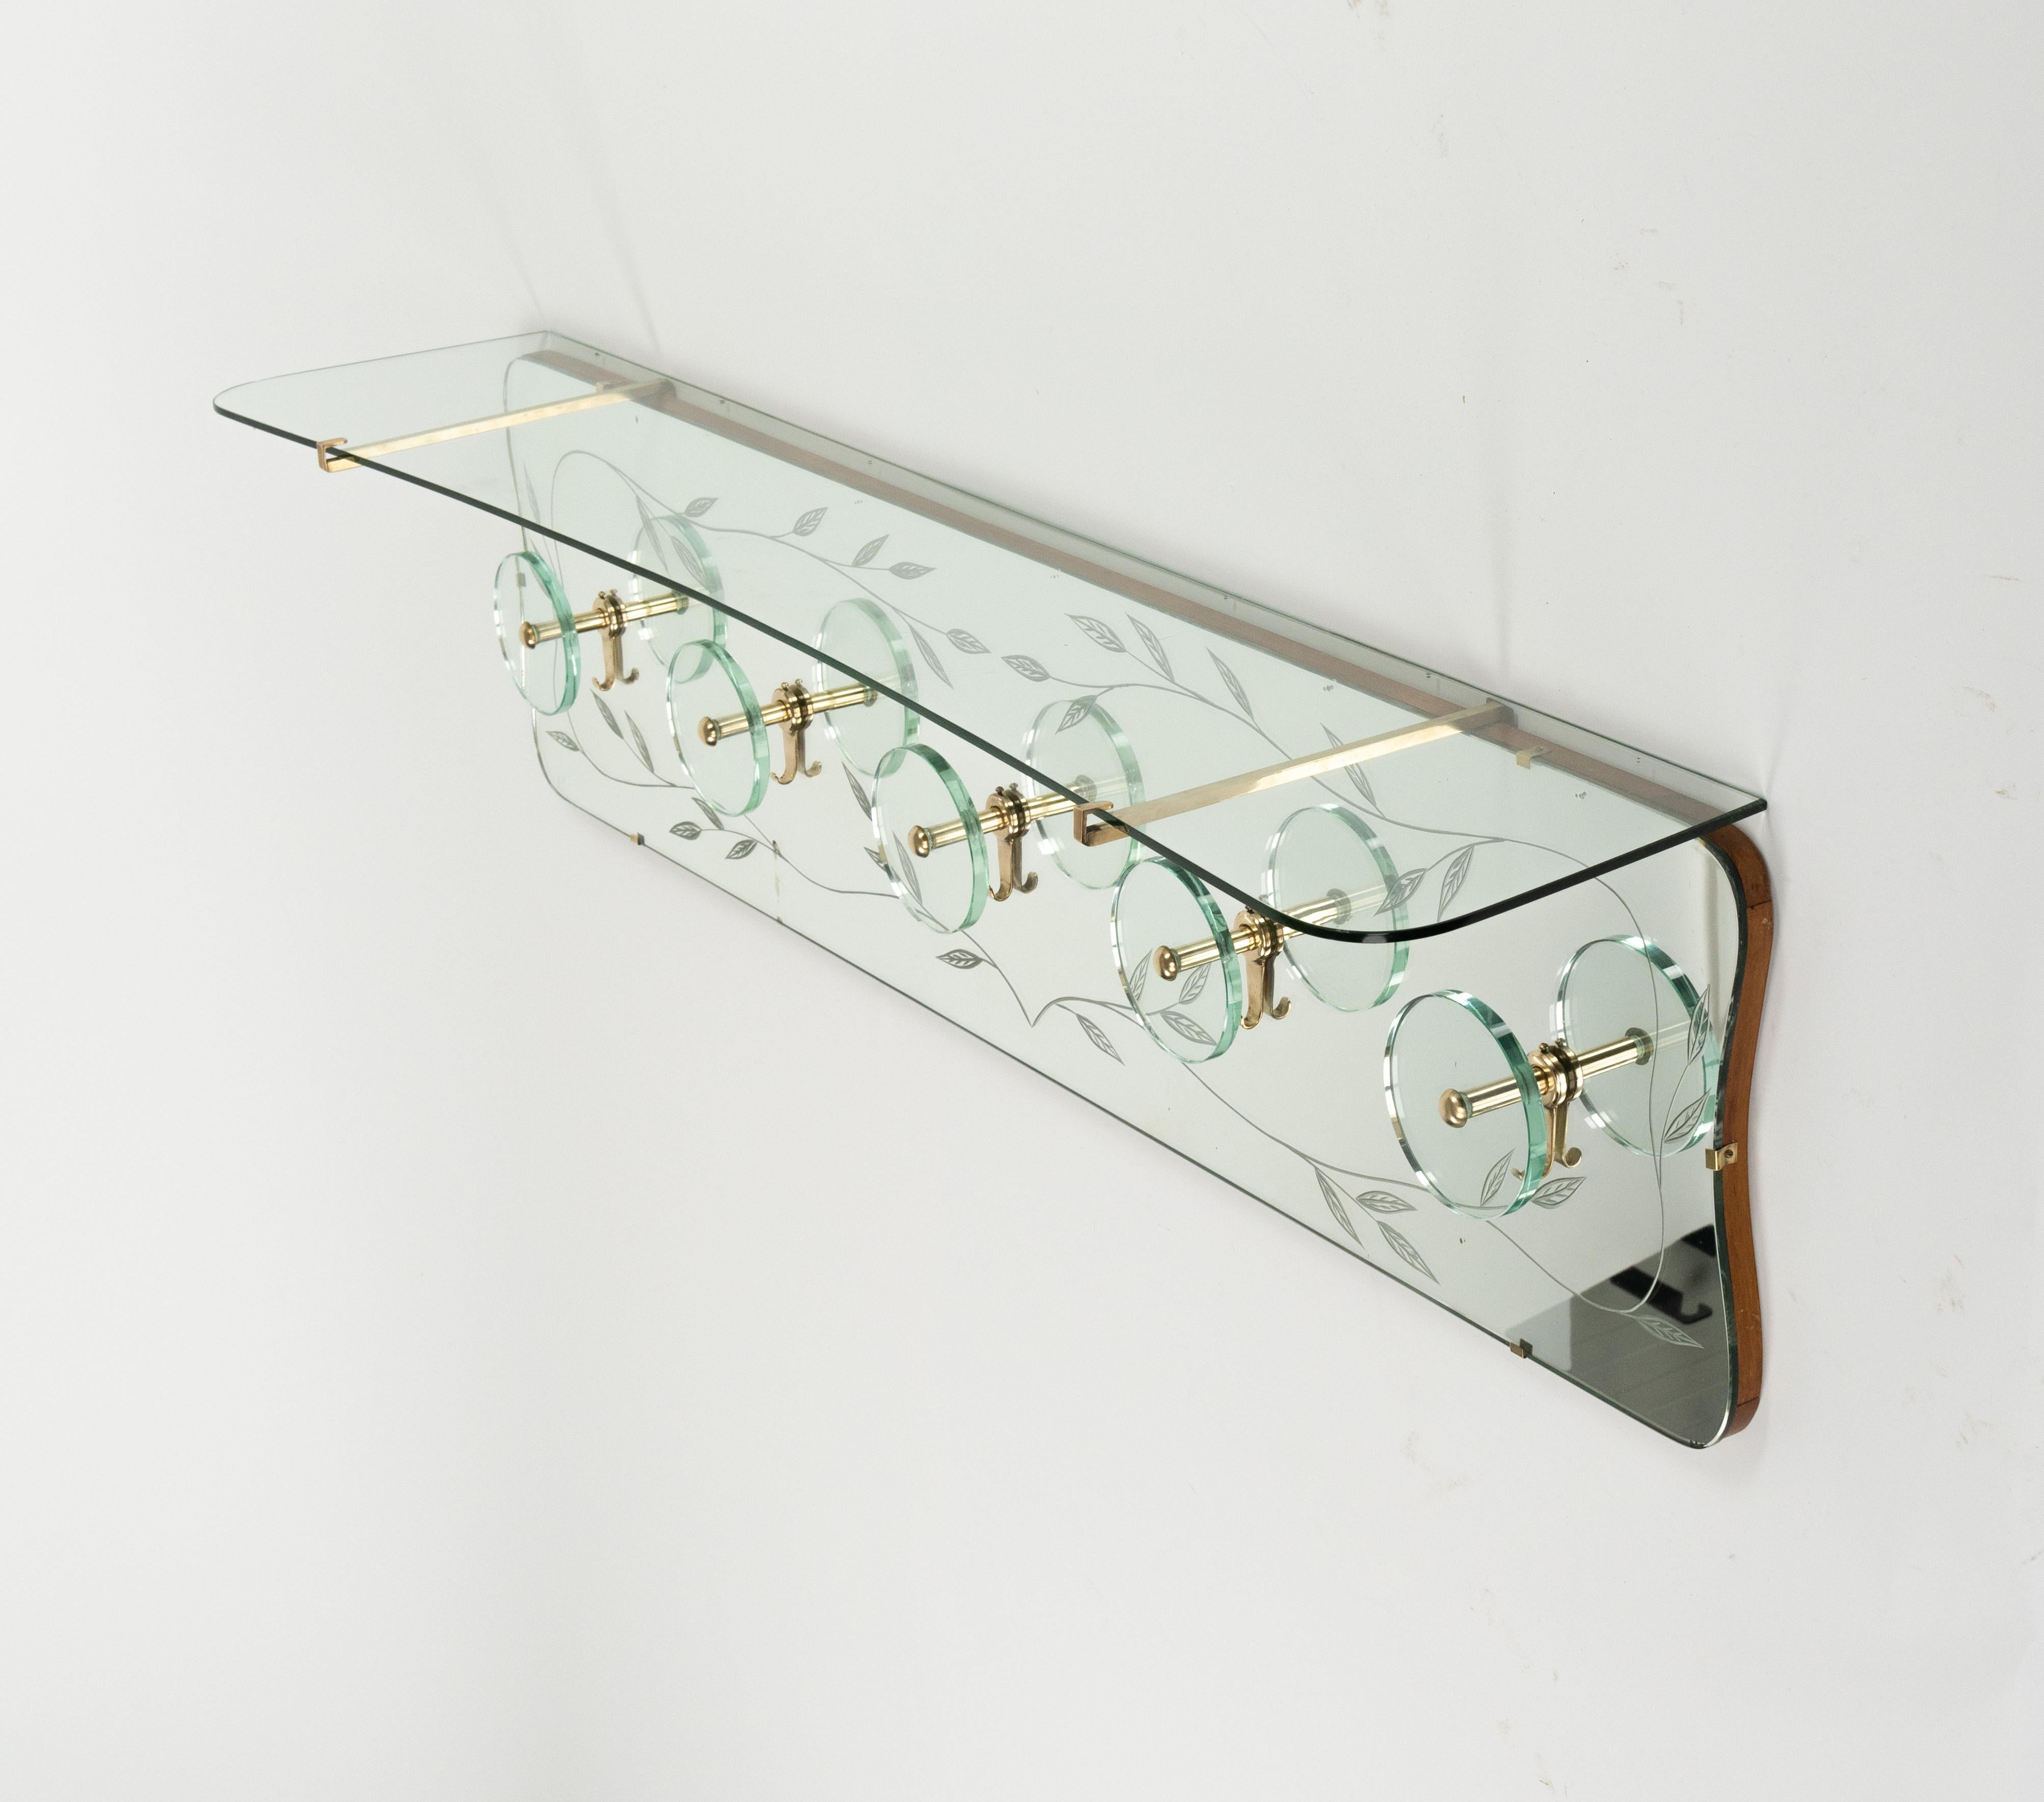 Midcentury Coat Rack Shelf in Mirror, Brass & Glass by Cristal Art, Italy, 1950s For Sale 8